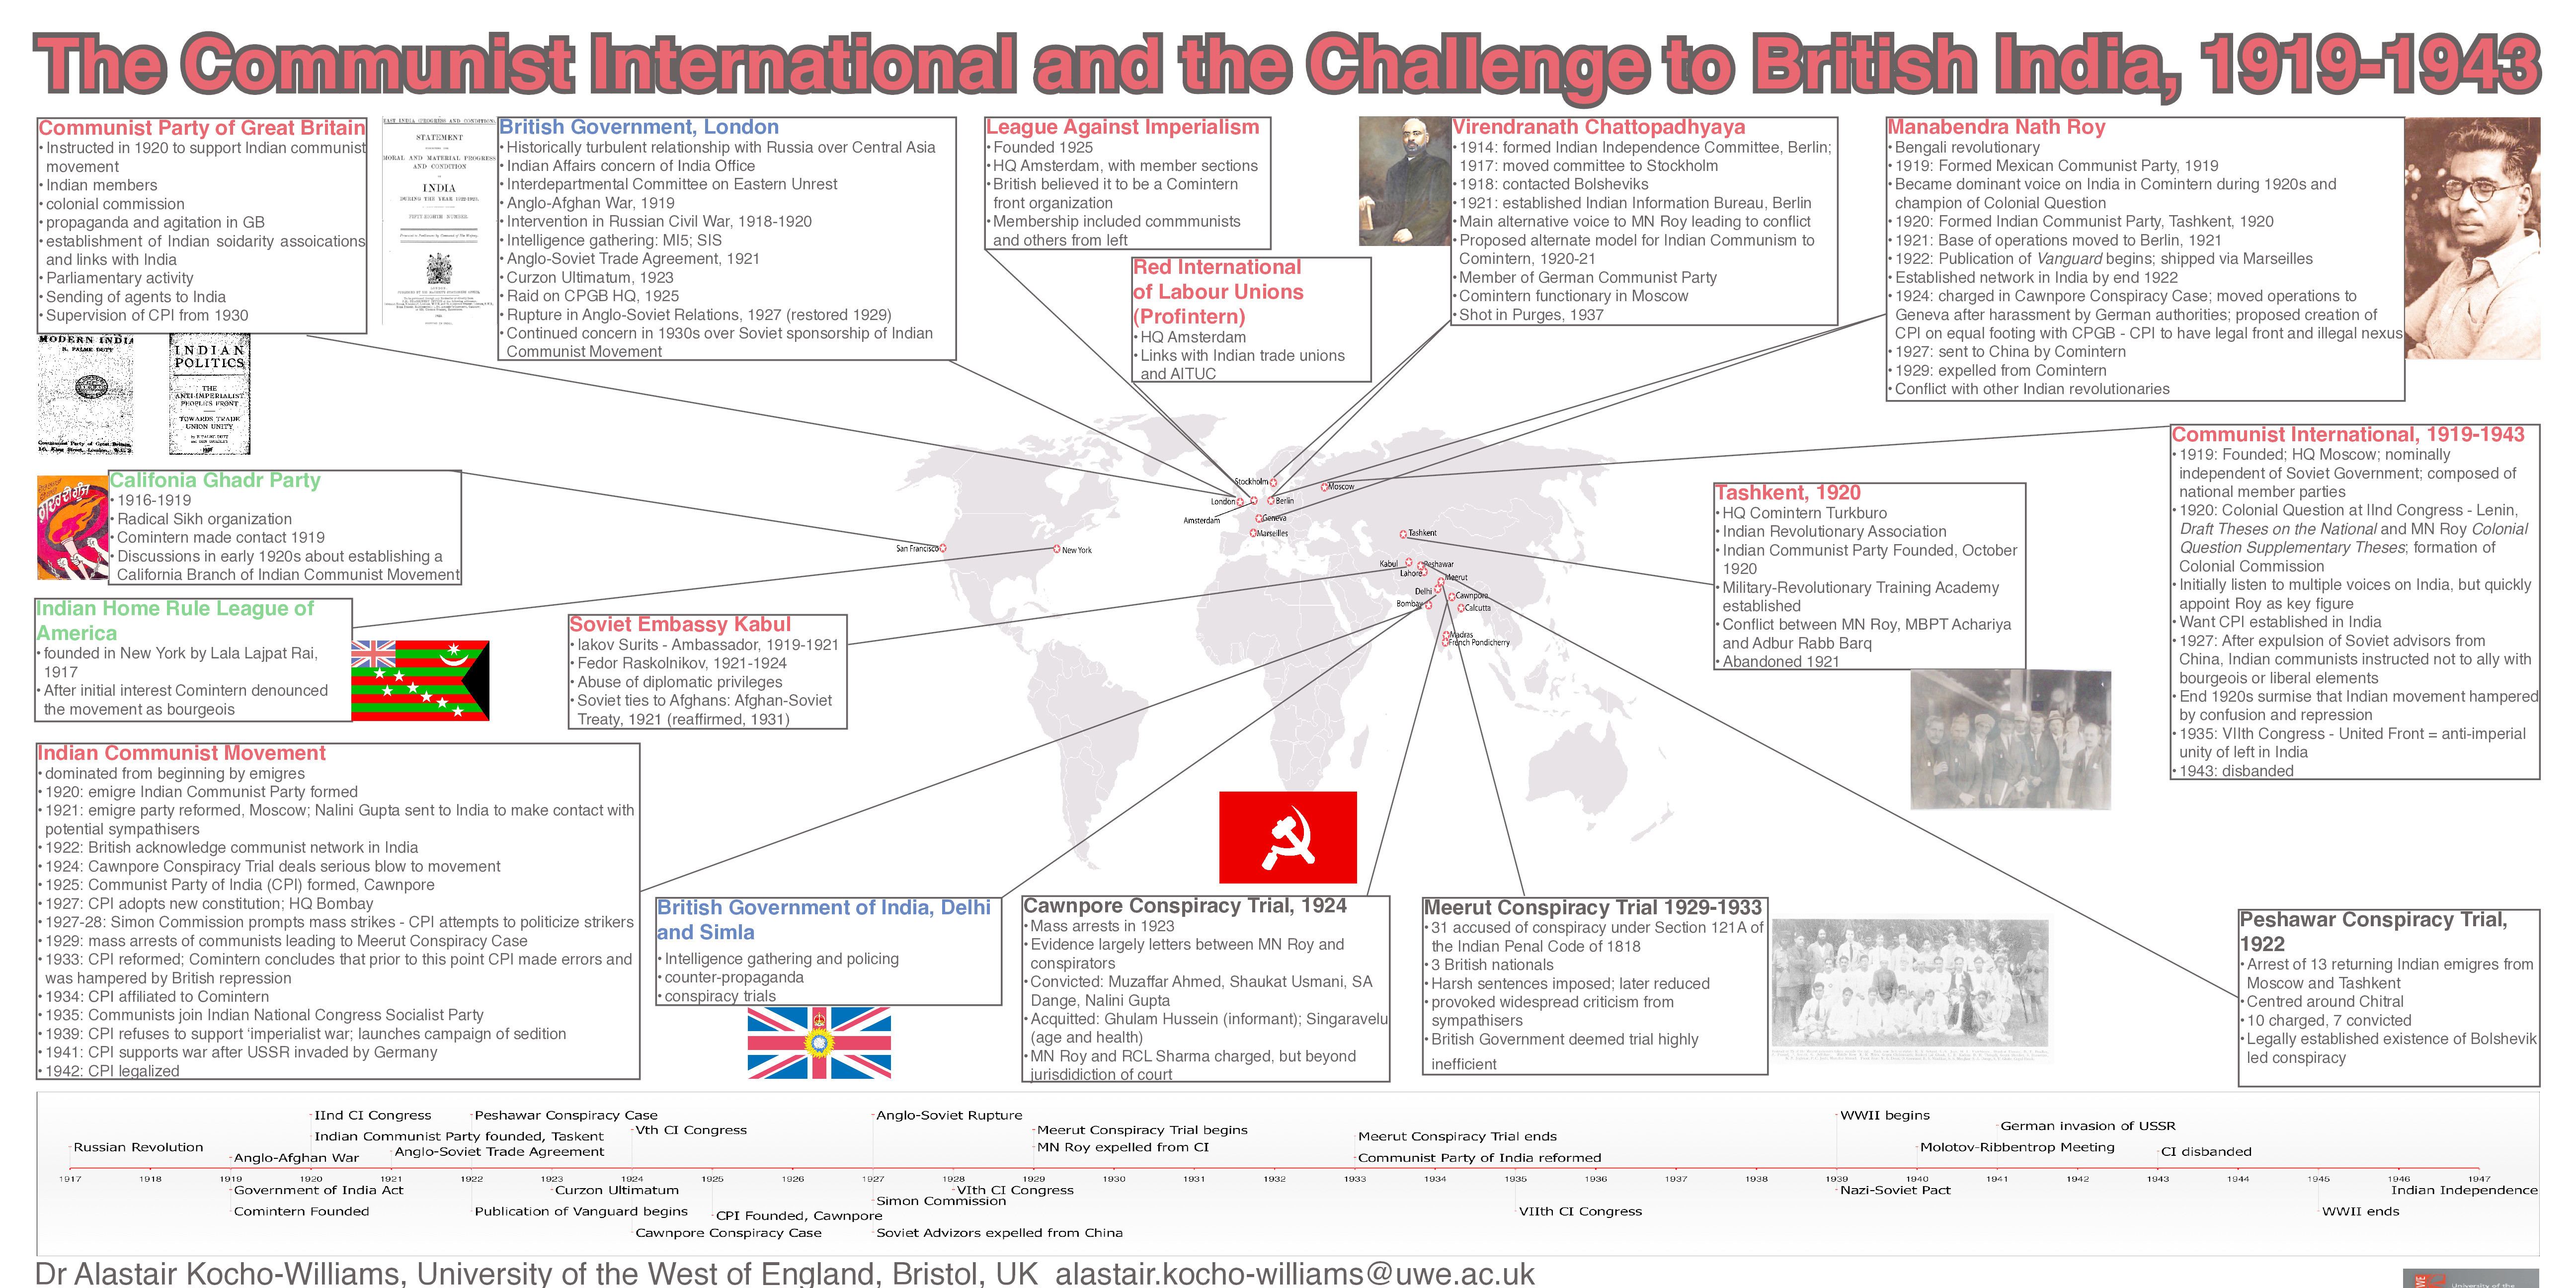 The communist international and the challenge to British India, 1919–43 Thumbnail